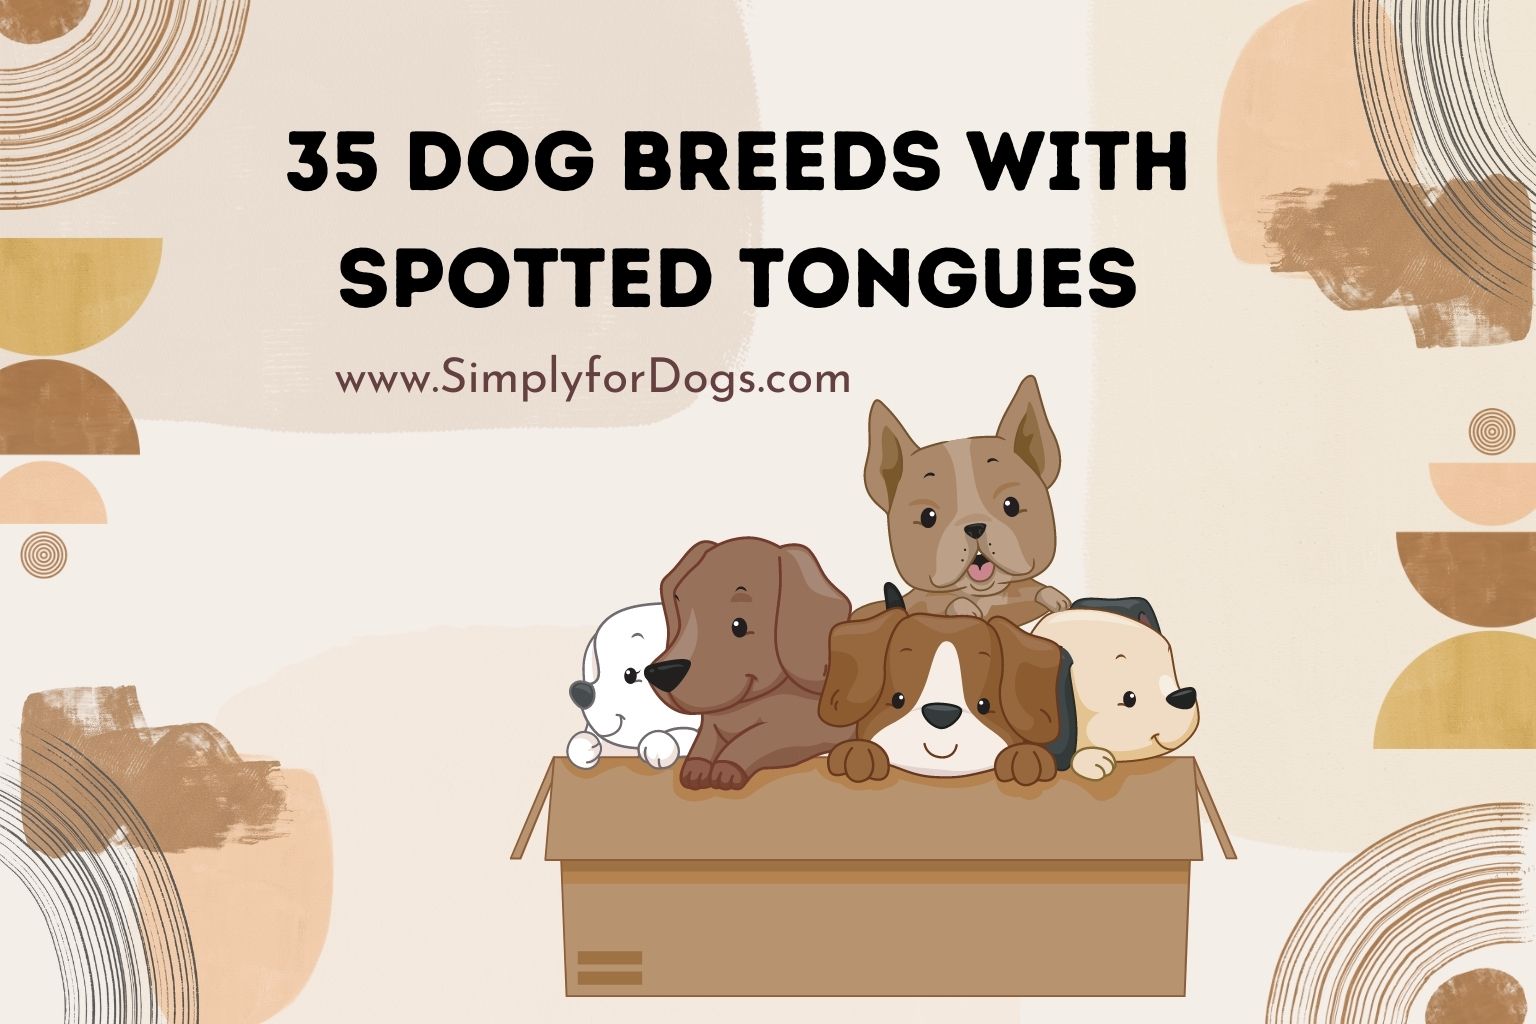 35 Dog Breeds with Spotted Tongues